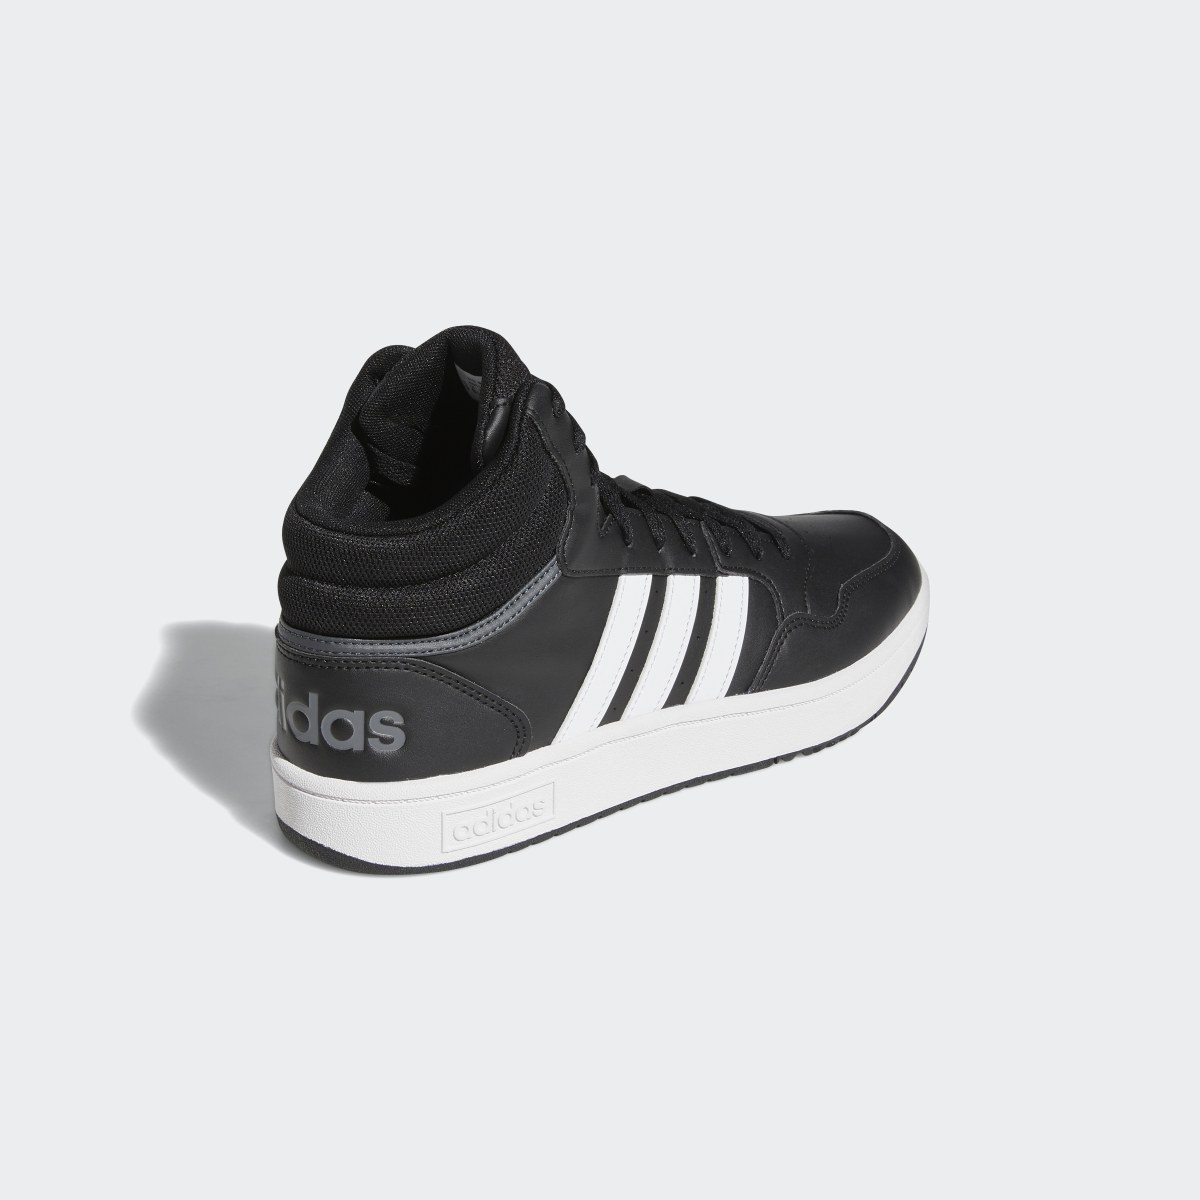 Adidas Chaussure Hoops 3.0 Mid Classic Vintage. 6